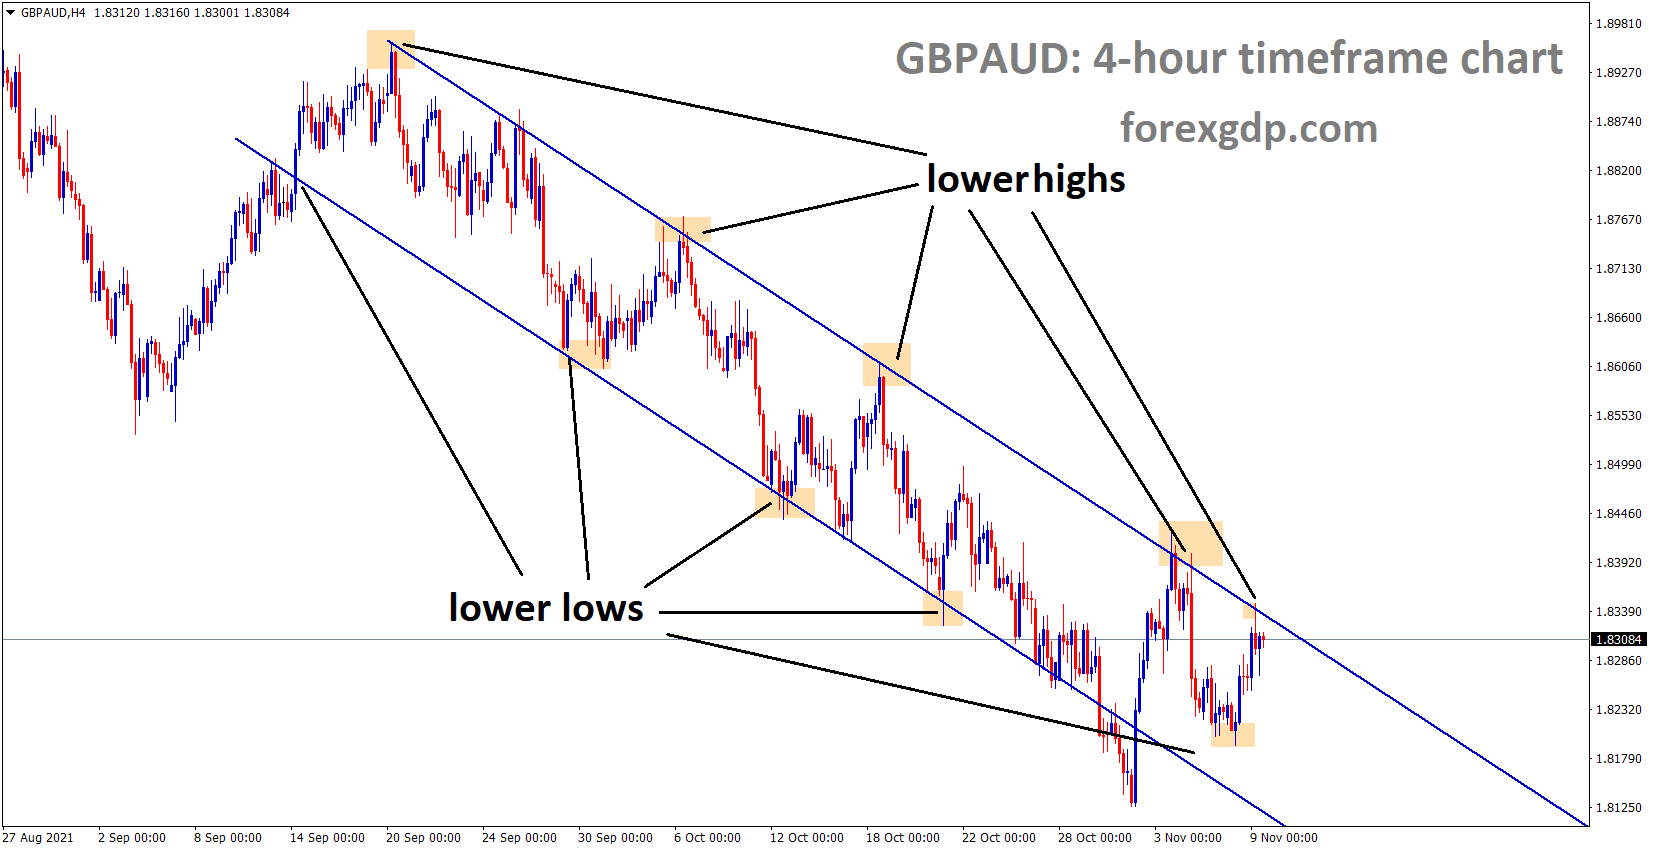 GBPAUD is moving in the Descending channel and reached the lower high